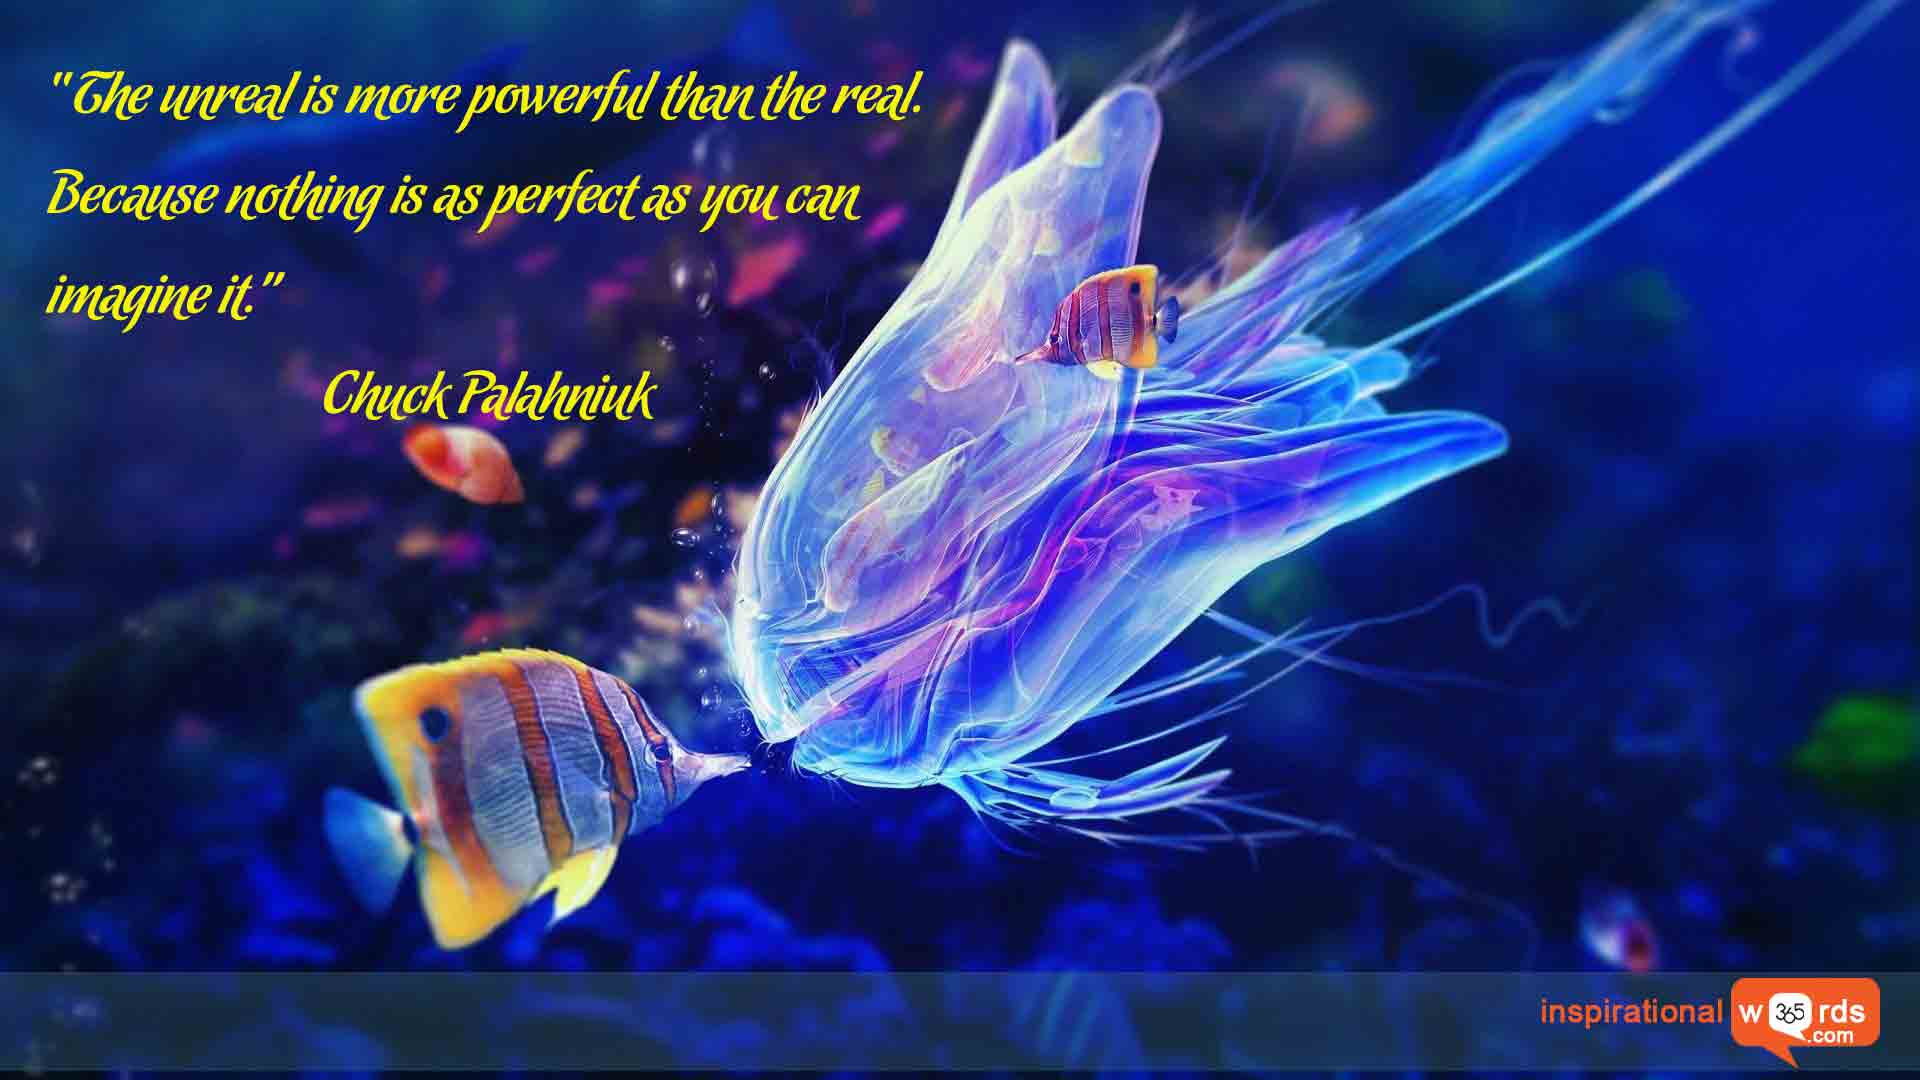 Inspirational Wallpaper Quote by Chuck Palahniuk